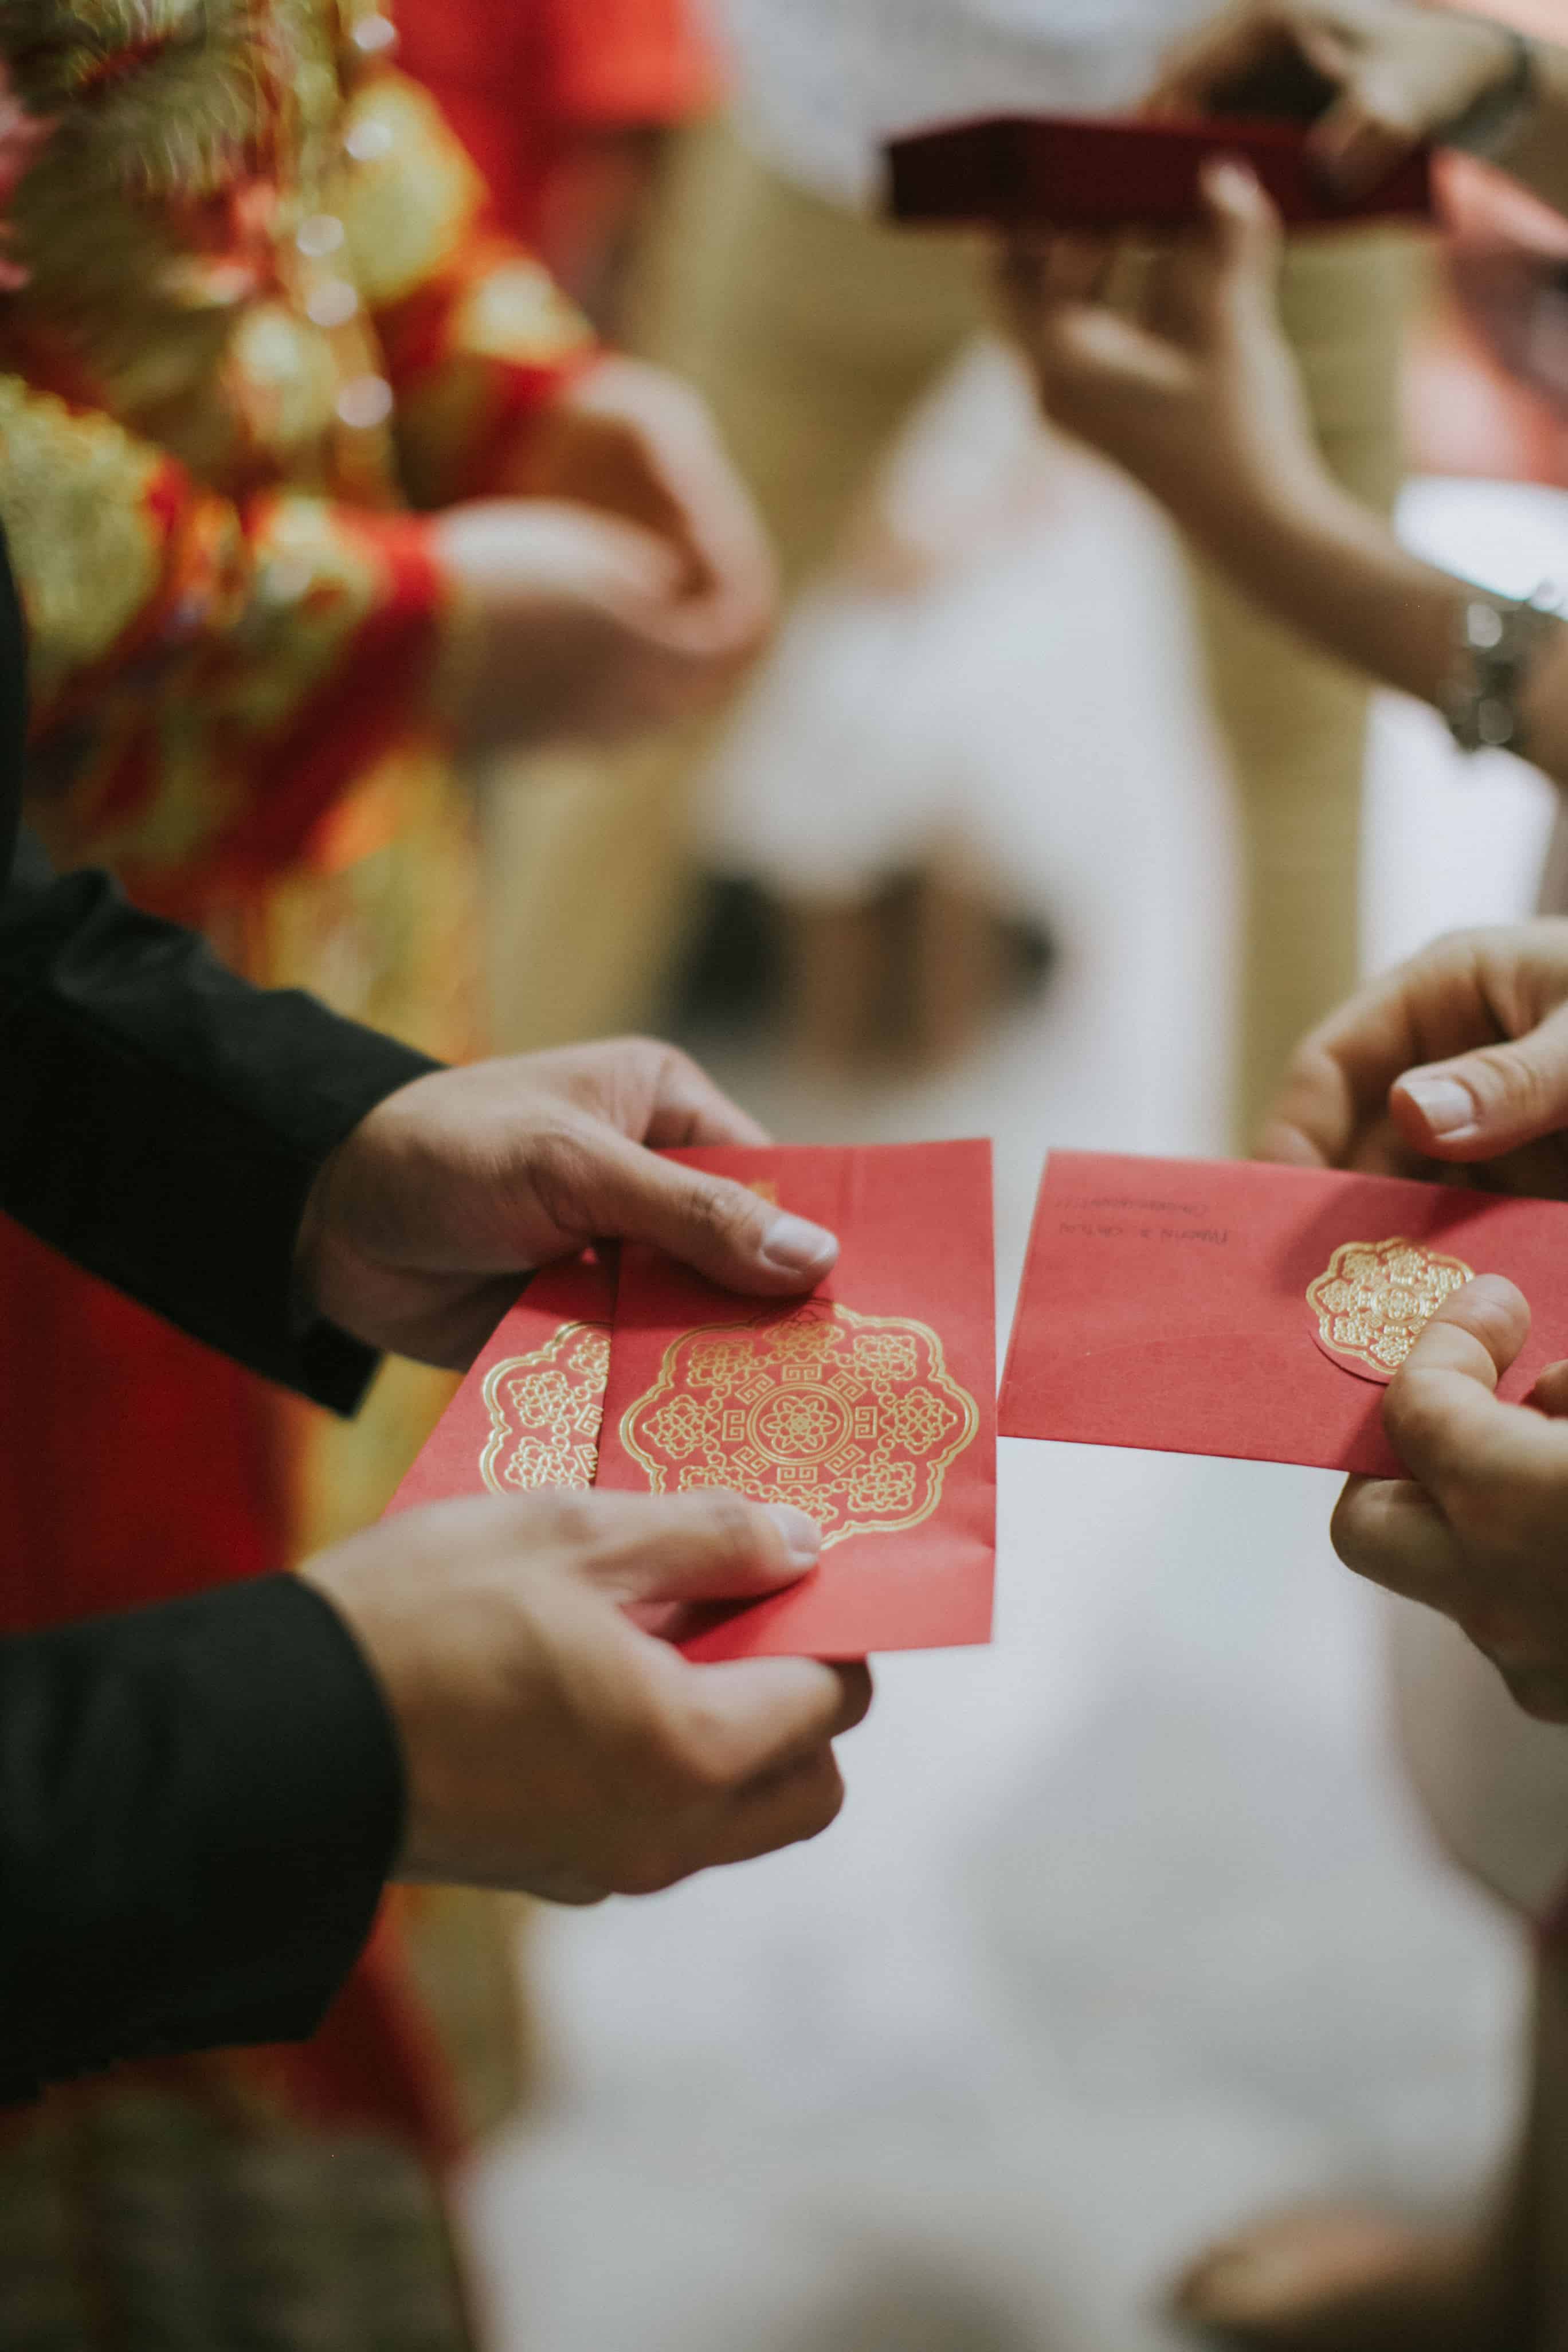 St. Regis Kuala Lumpur Hotel The Cross Effects Malaysia Destination Wedding Photographers Actual Day in Petaling Jaya Photography Traditional Chinese Tea Ceremony Moements